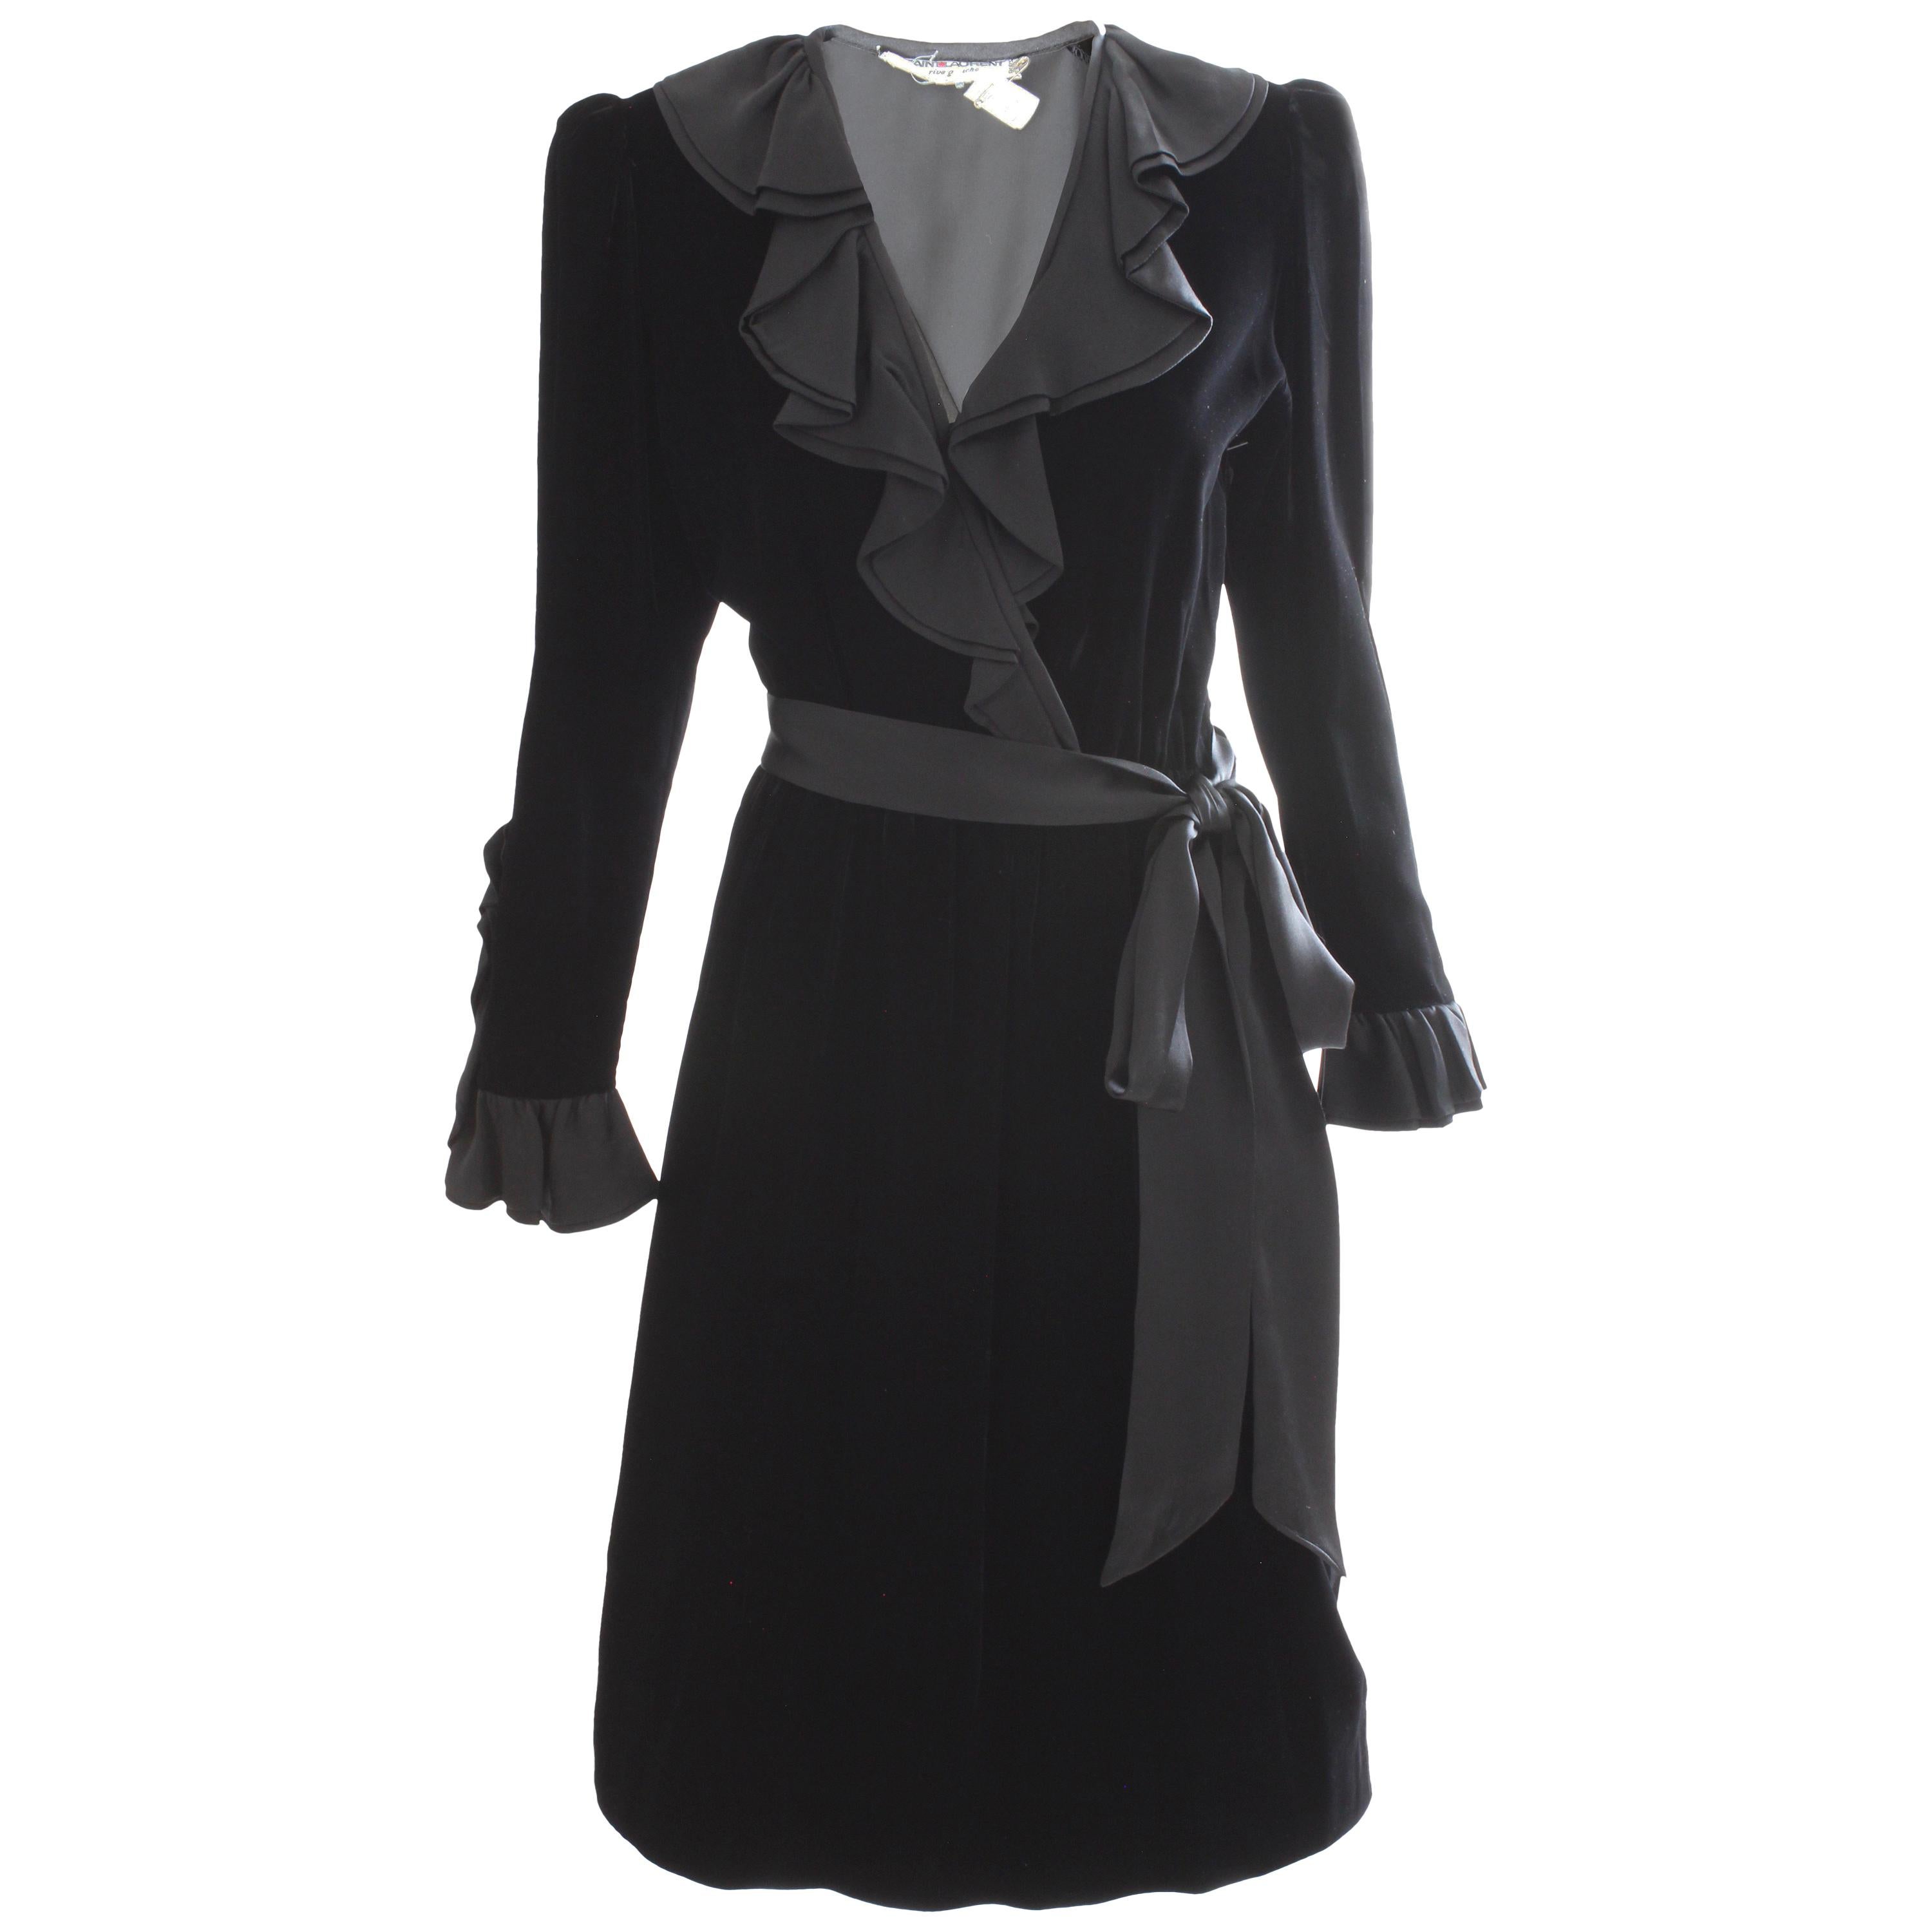 This incredible cocktail dress was made by Yves Saint Laurent, most likely in the 1970s. Made from silk velvet, this dress features black satin ruffle detailing at the collar and neckline, and on the back of each sleeve. Comes with its original